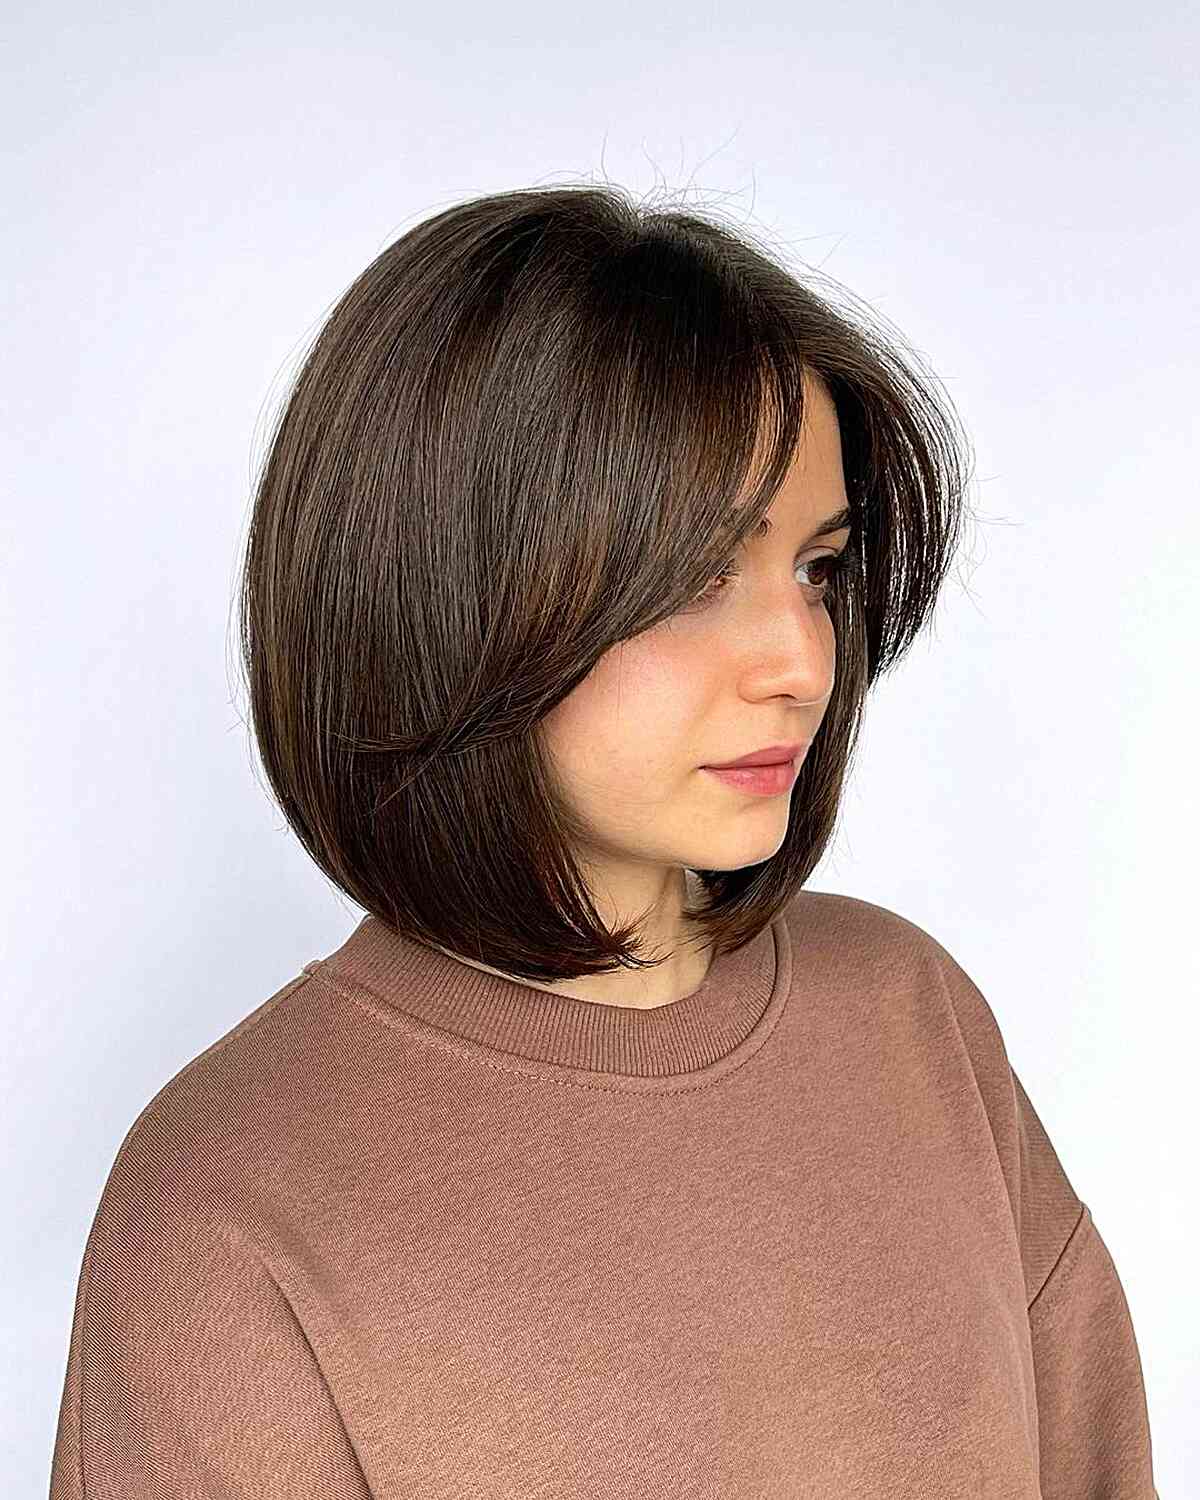 Neck-Length Thick Round Bob with Face-Framing Bangs